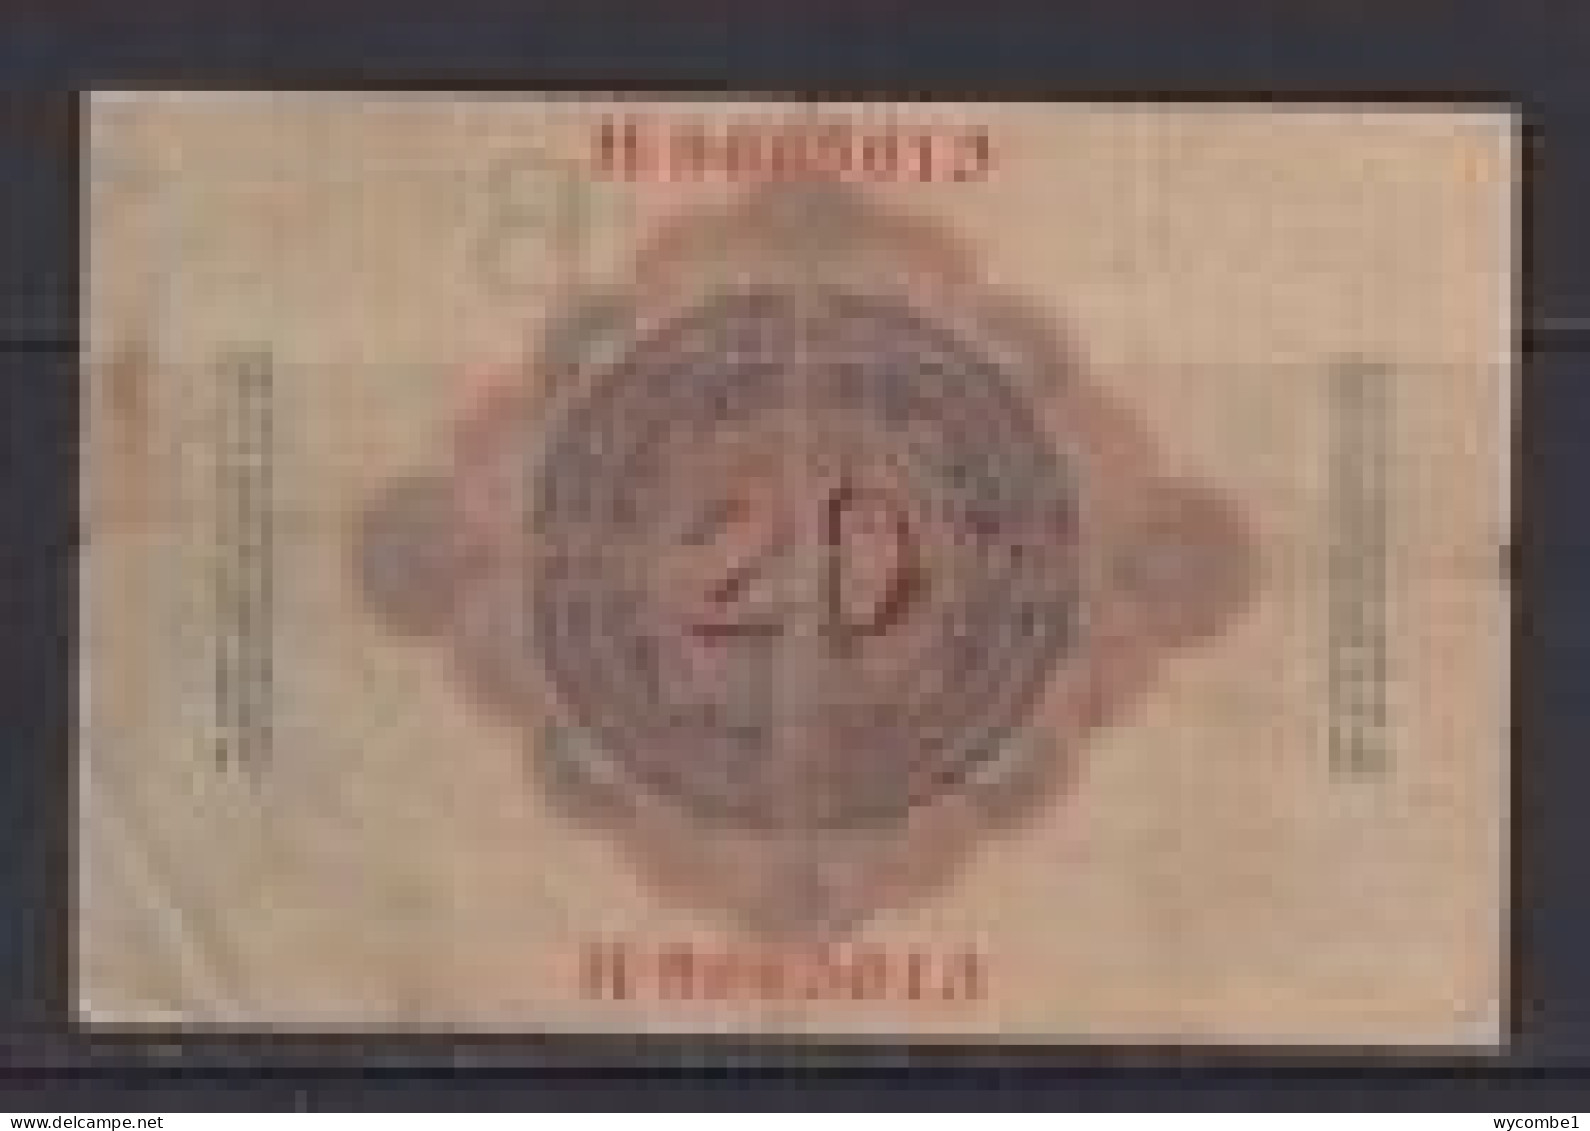 GERMANY - 1910 Reichsbanknote 20 Mark Circulated Note - 20 Mark